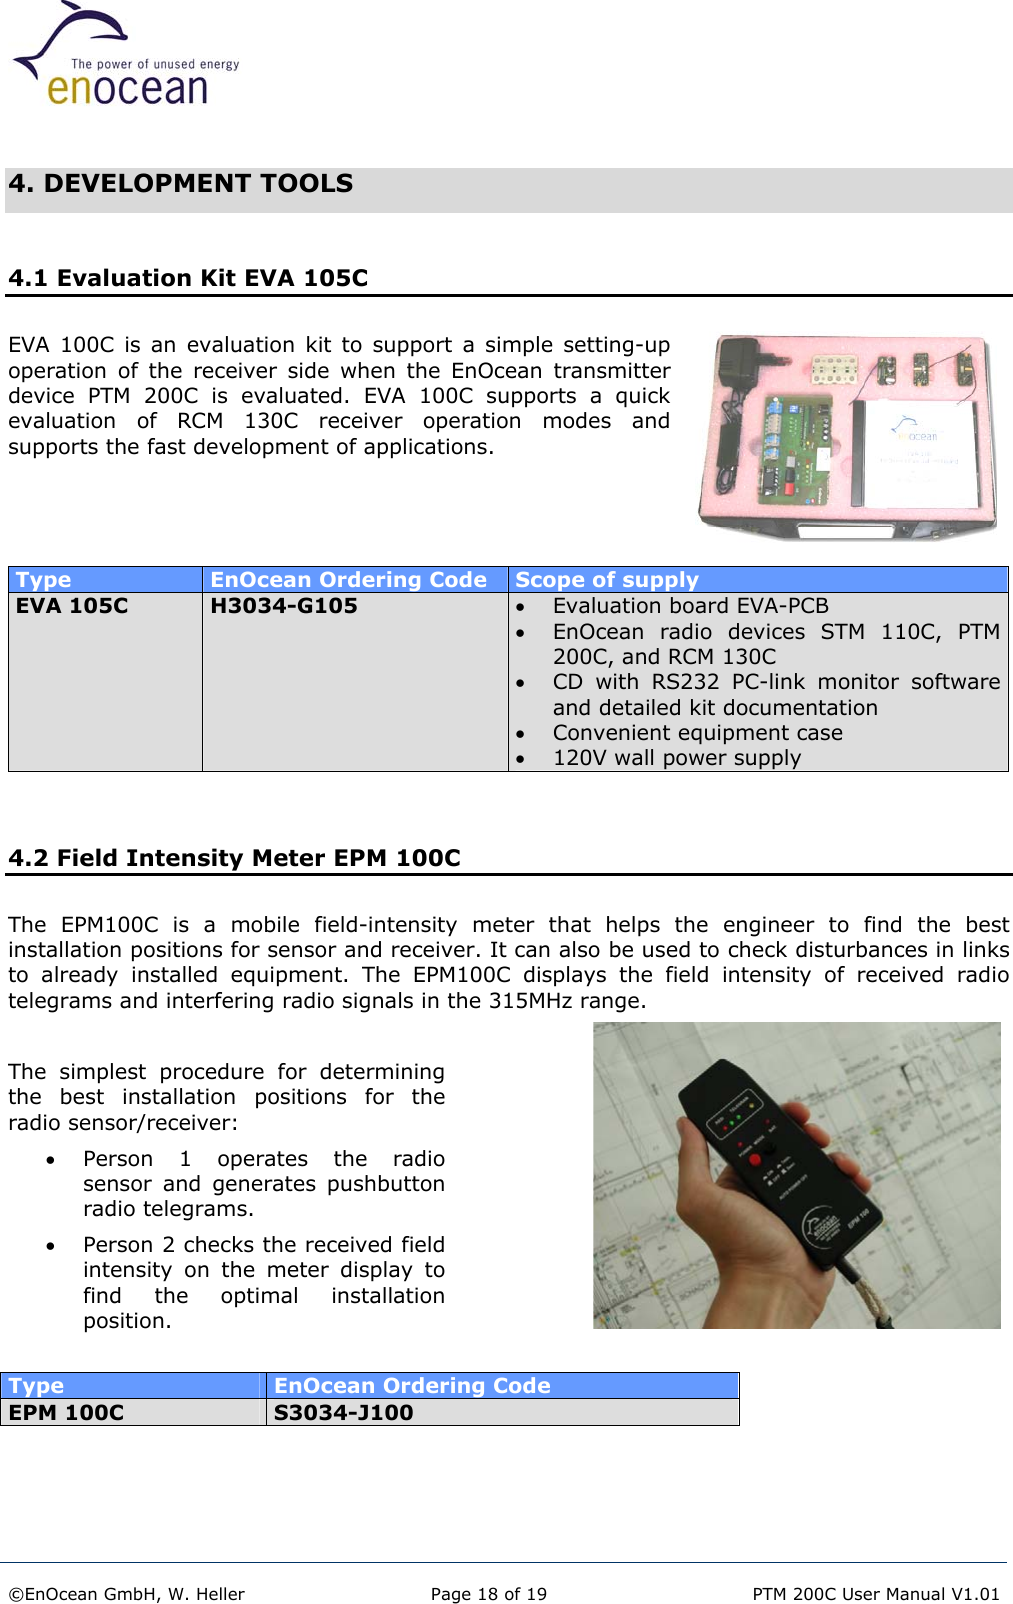   4. DEVELOPMENT TOOLS  4.1 Evaluation Kit EVA 105C EVA 100C is an evaluation kit to support a simple setting-up operation of the receiver side when the EnOcean transmitter device PTM 200C is evaluated. EVA 100C supports a quick evaluation of RCM 130C receiver operation modes and supports the fast development of applications.     Type  EnOcean Ordering Code  Scope of supply EVA 105C  H3034-G105  •  Evaluation board EVA-PCB •  EnOcean radio devices STM 110C, PTM 200C, and RCM 130C •  CD with RS232 PC-link monitor software and detailed kit documentation •  Convenient equipment case •  120V wall power supply   4.2 Field Intensity Meter EPM 100C  The EPM100C is a mobile field-intensity meter that helps the engineer to find the best installation positions for sensor and receiver. It can also be used to check disturbances in links to already installed equipment. The EPM100C displays the field intensity of received radio telegrams and interfering radio signals in the 315MHz range.  The simplest procedure for determining the best installation positions for the radio sensor/receiver: •  Person 1 operates the radio sensor and generates pushbutton radio telegrams. •  Person 2 checks the received field intensity on the meter display to find the optimal installation position.  Type  EnOcean Ordering Code EPM 100C  S3034-J100    ©EnOcean GmbH, W. Heller  Page 18 of 19   PTM 200C User Manual V1.01  